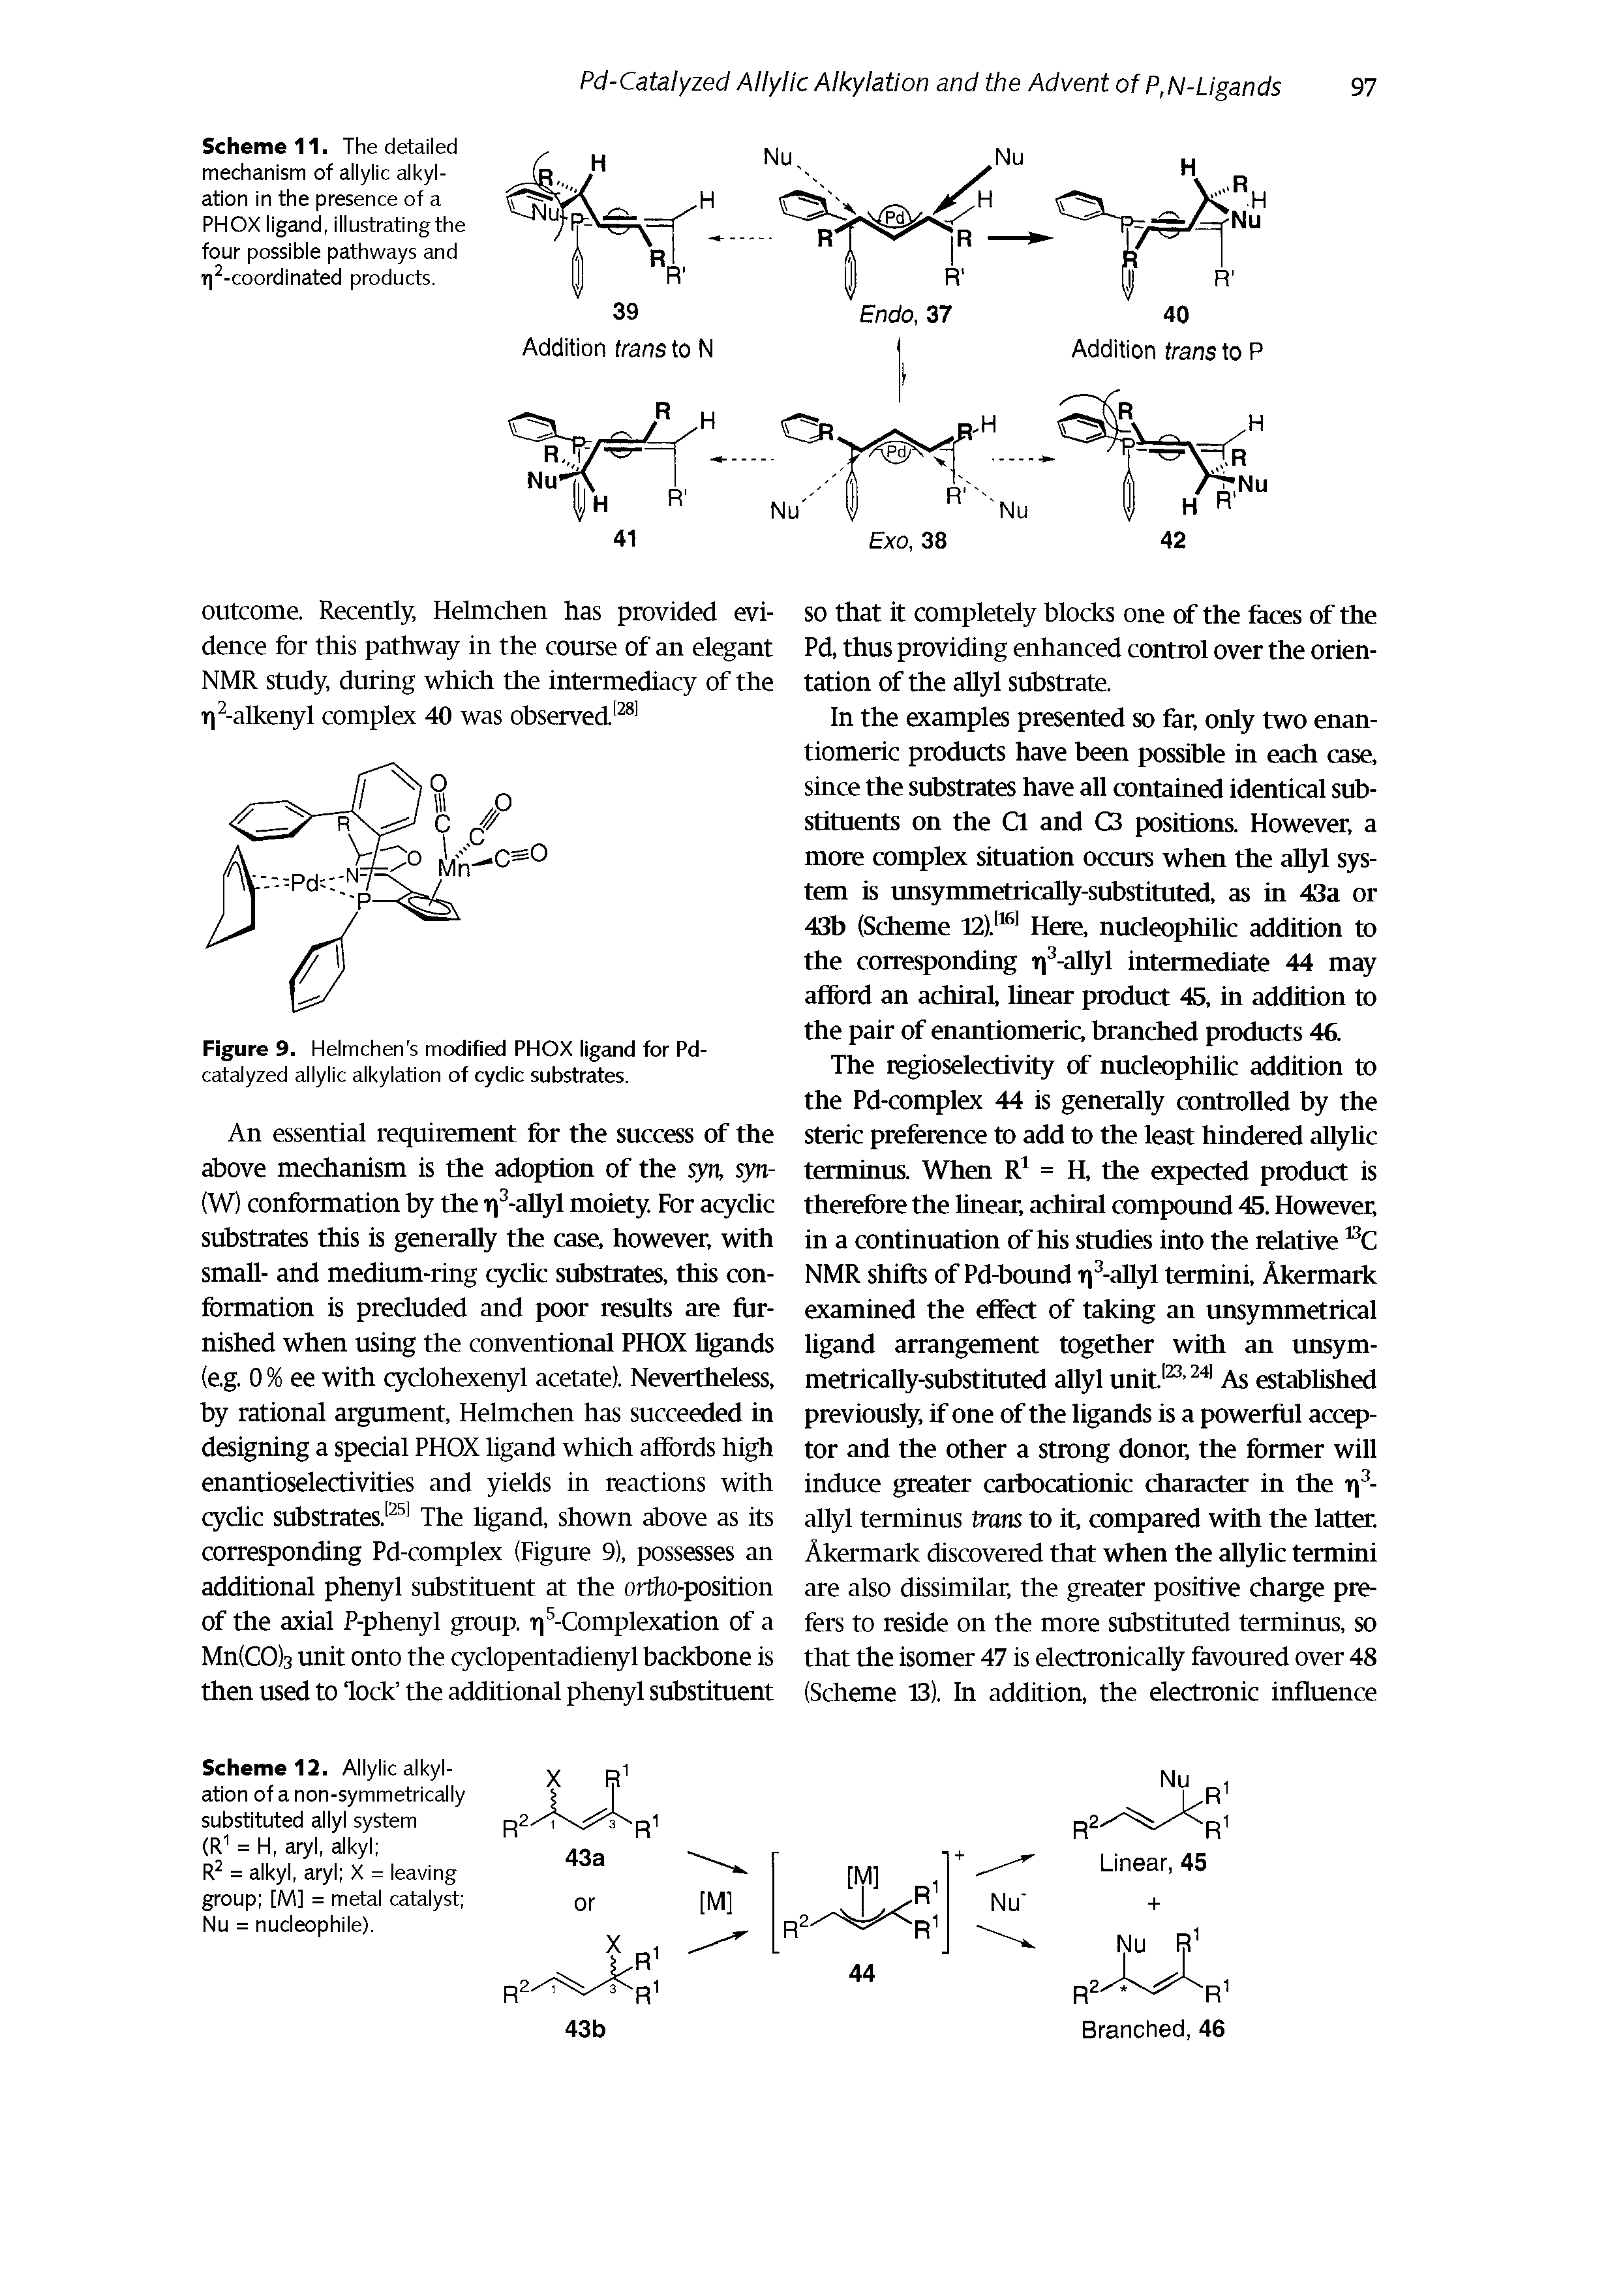 Scheme 11. The detailed mechanism of allylic alkylation in the presence of a PHOX ligand, illustrating the four possible pathways and r 2-coordinated products.